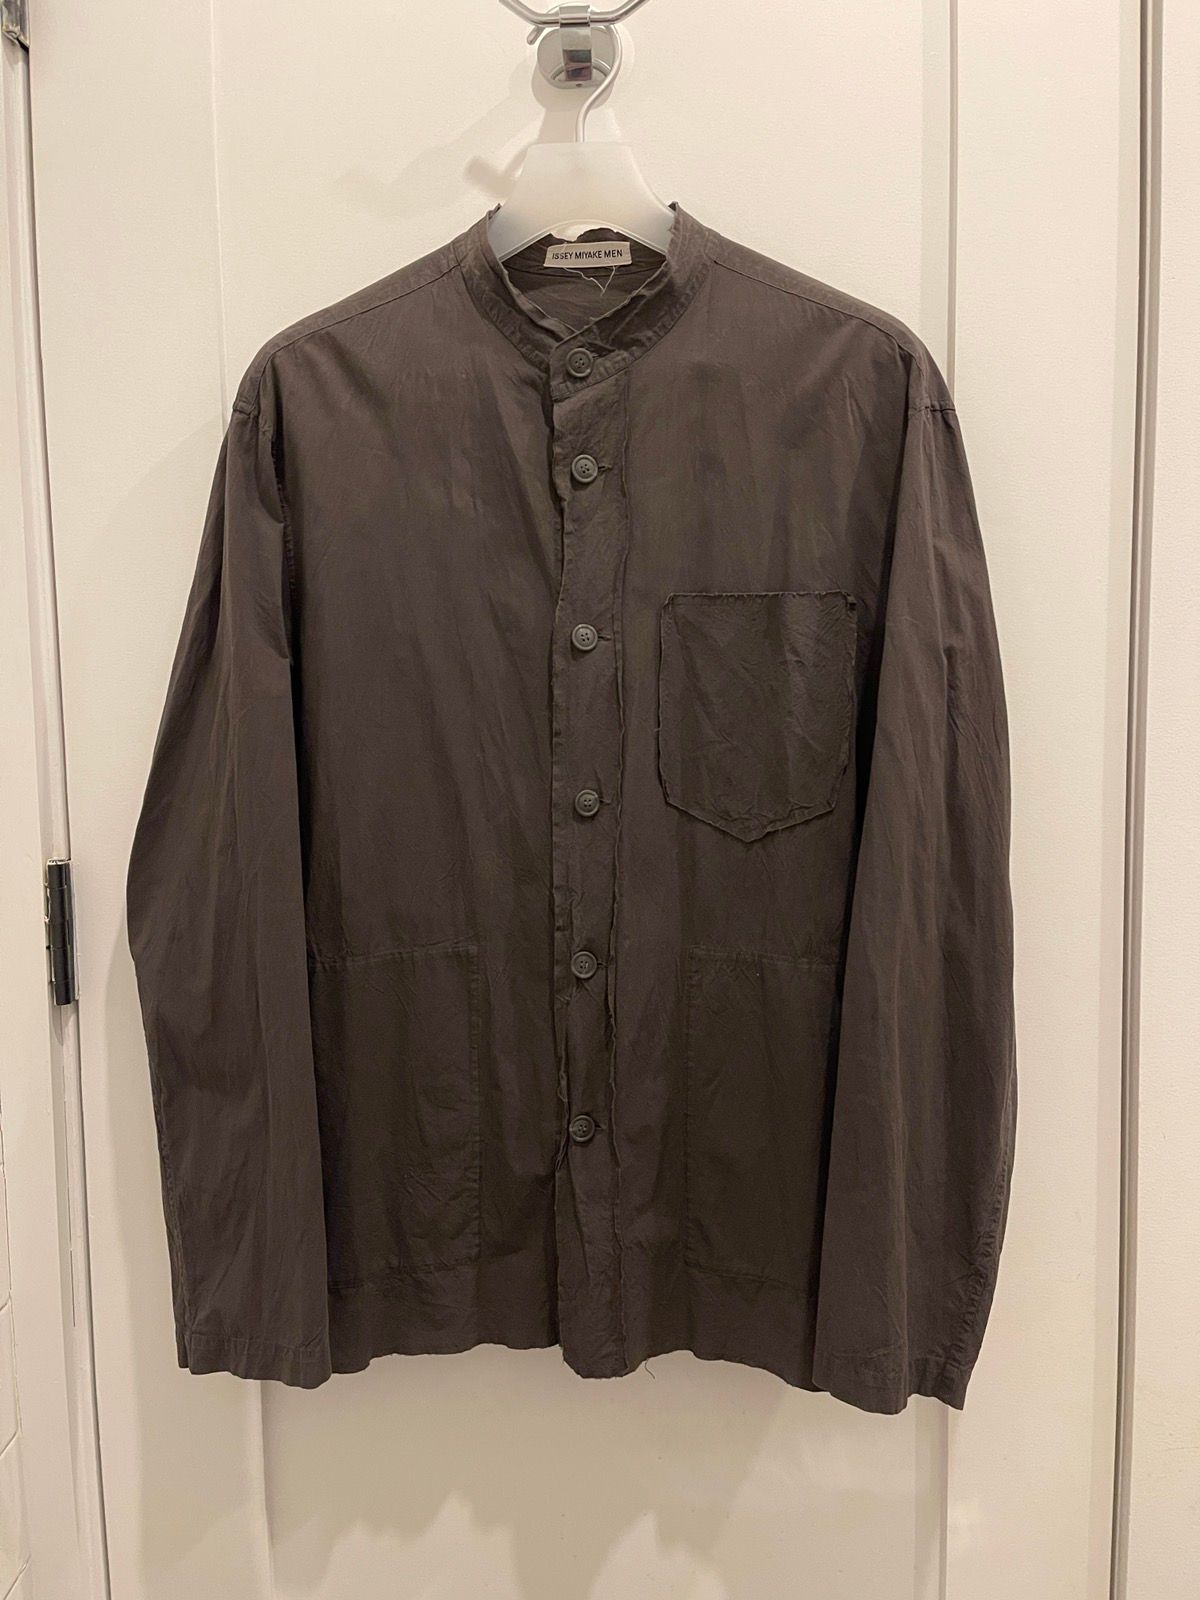 Issey Miyake Last Drop Vintage Raw Edge Stand Collar Overshirt Size US L / EU 52-54 / 3 - 1 Preview